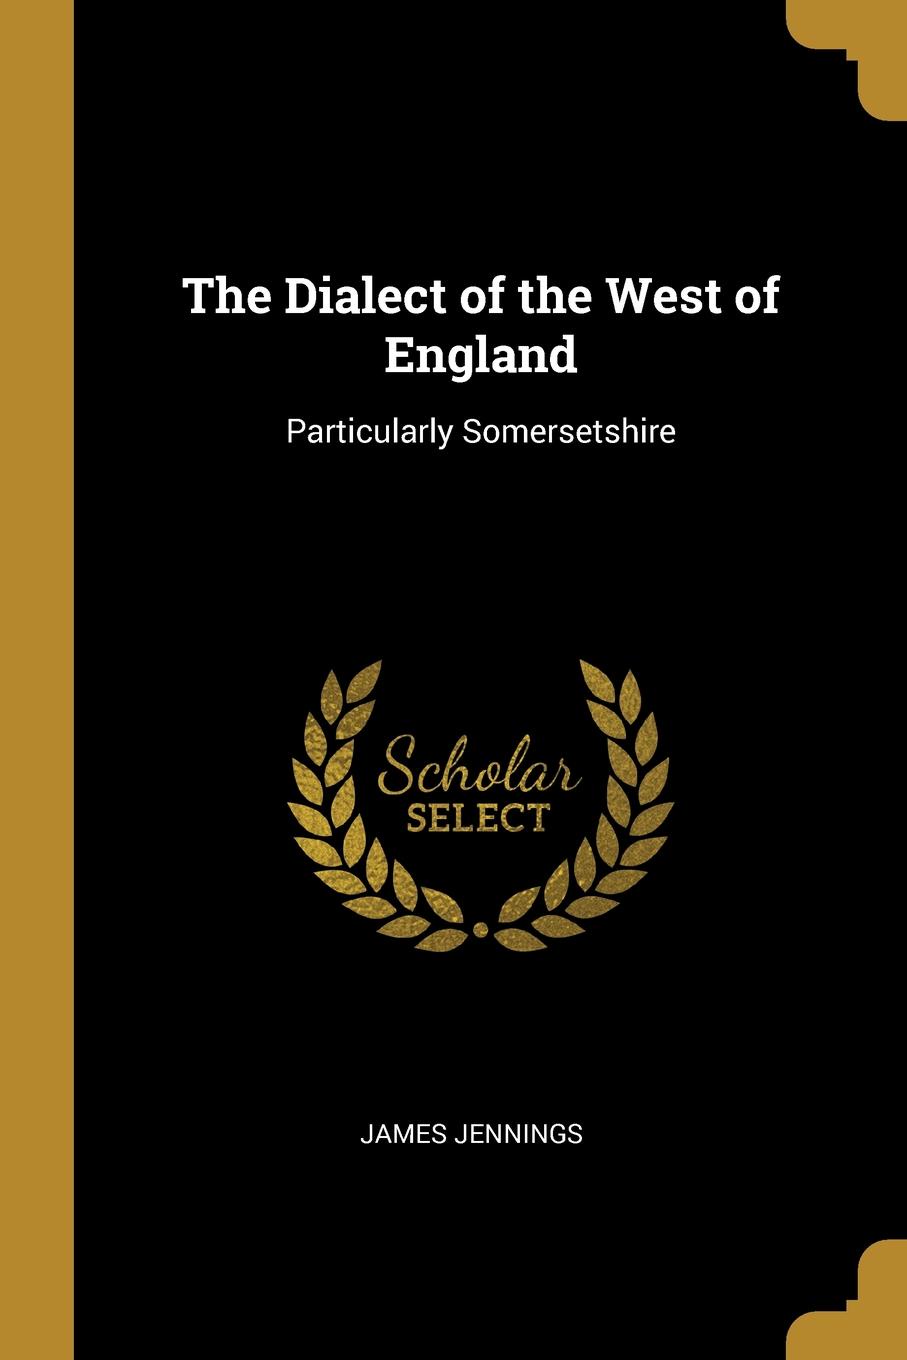 The Dialect of the West of England. Particularly Somersetshire